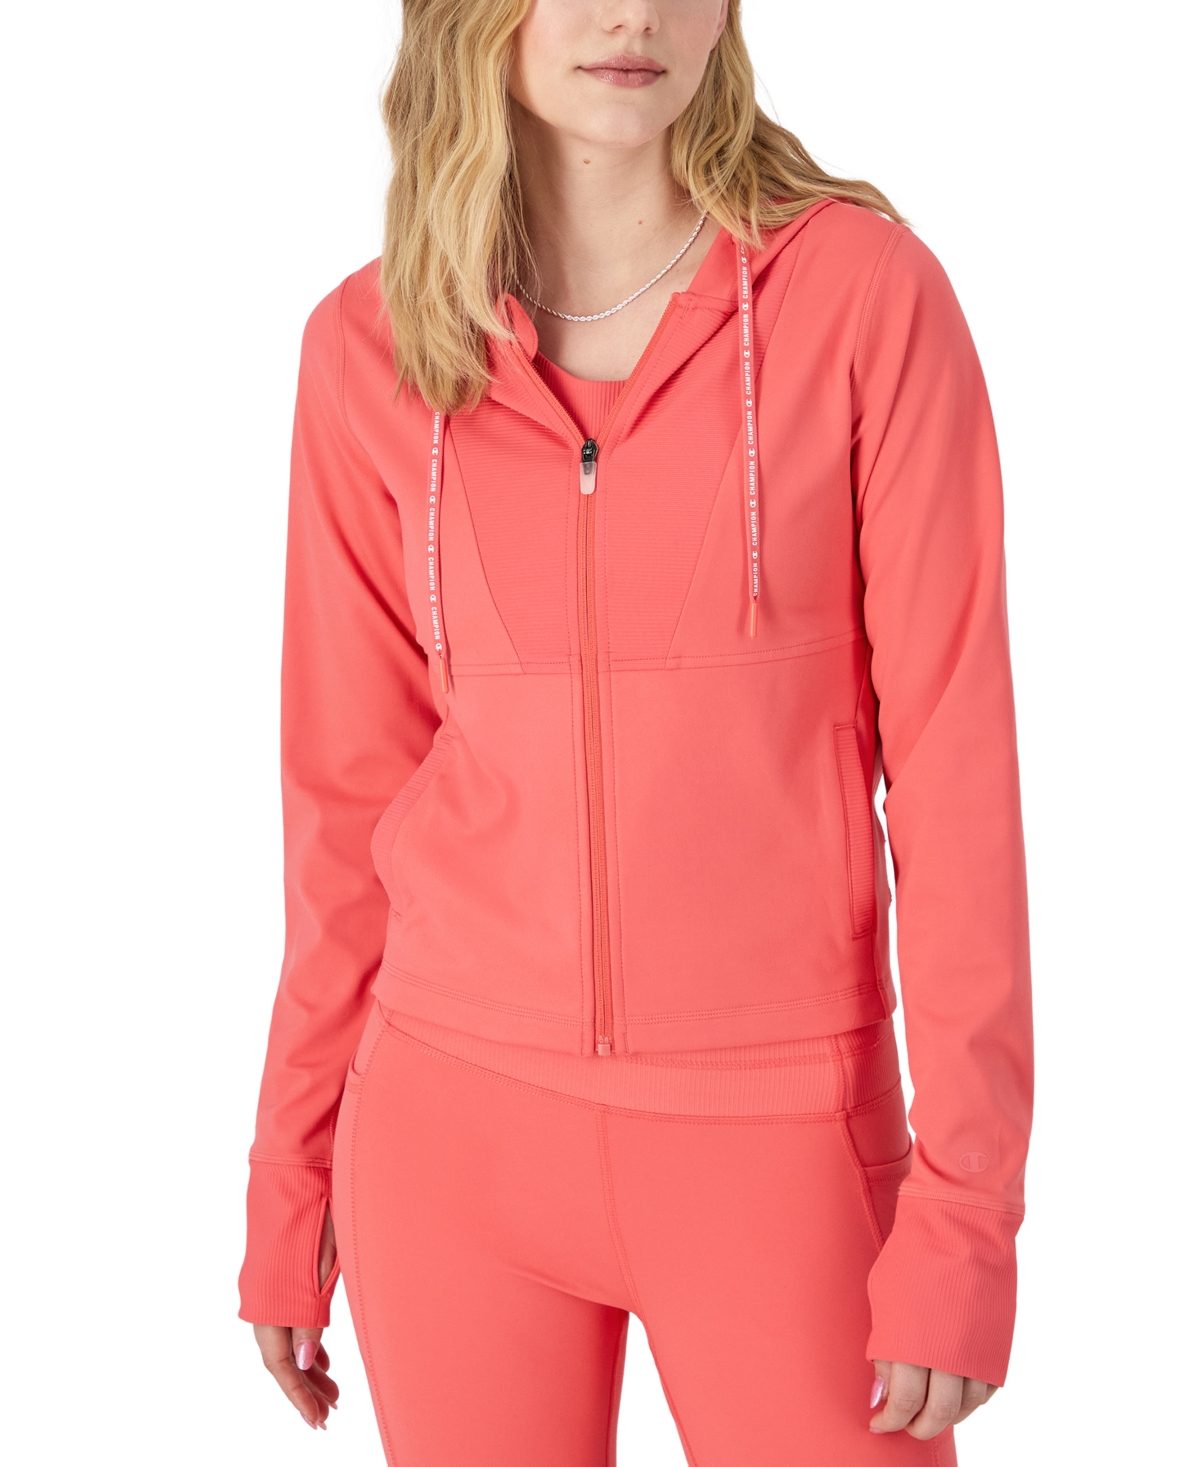 Women's Soft Touch Zip-Front Hooded Jacket - High Tide Coral